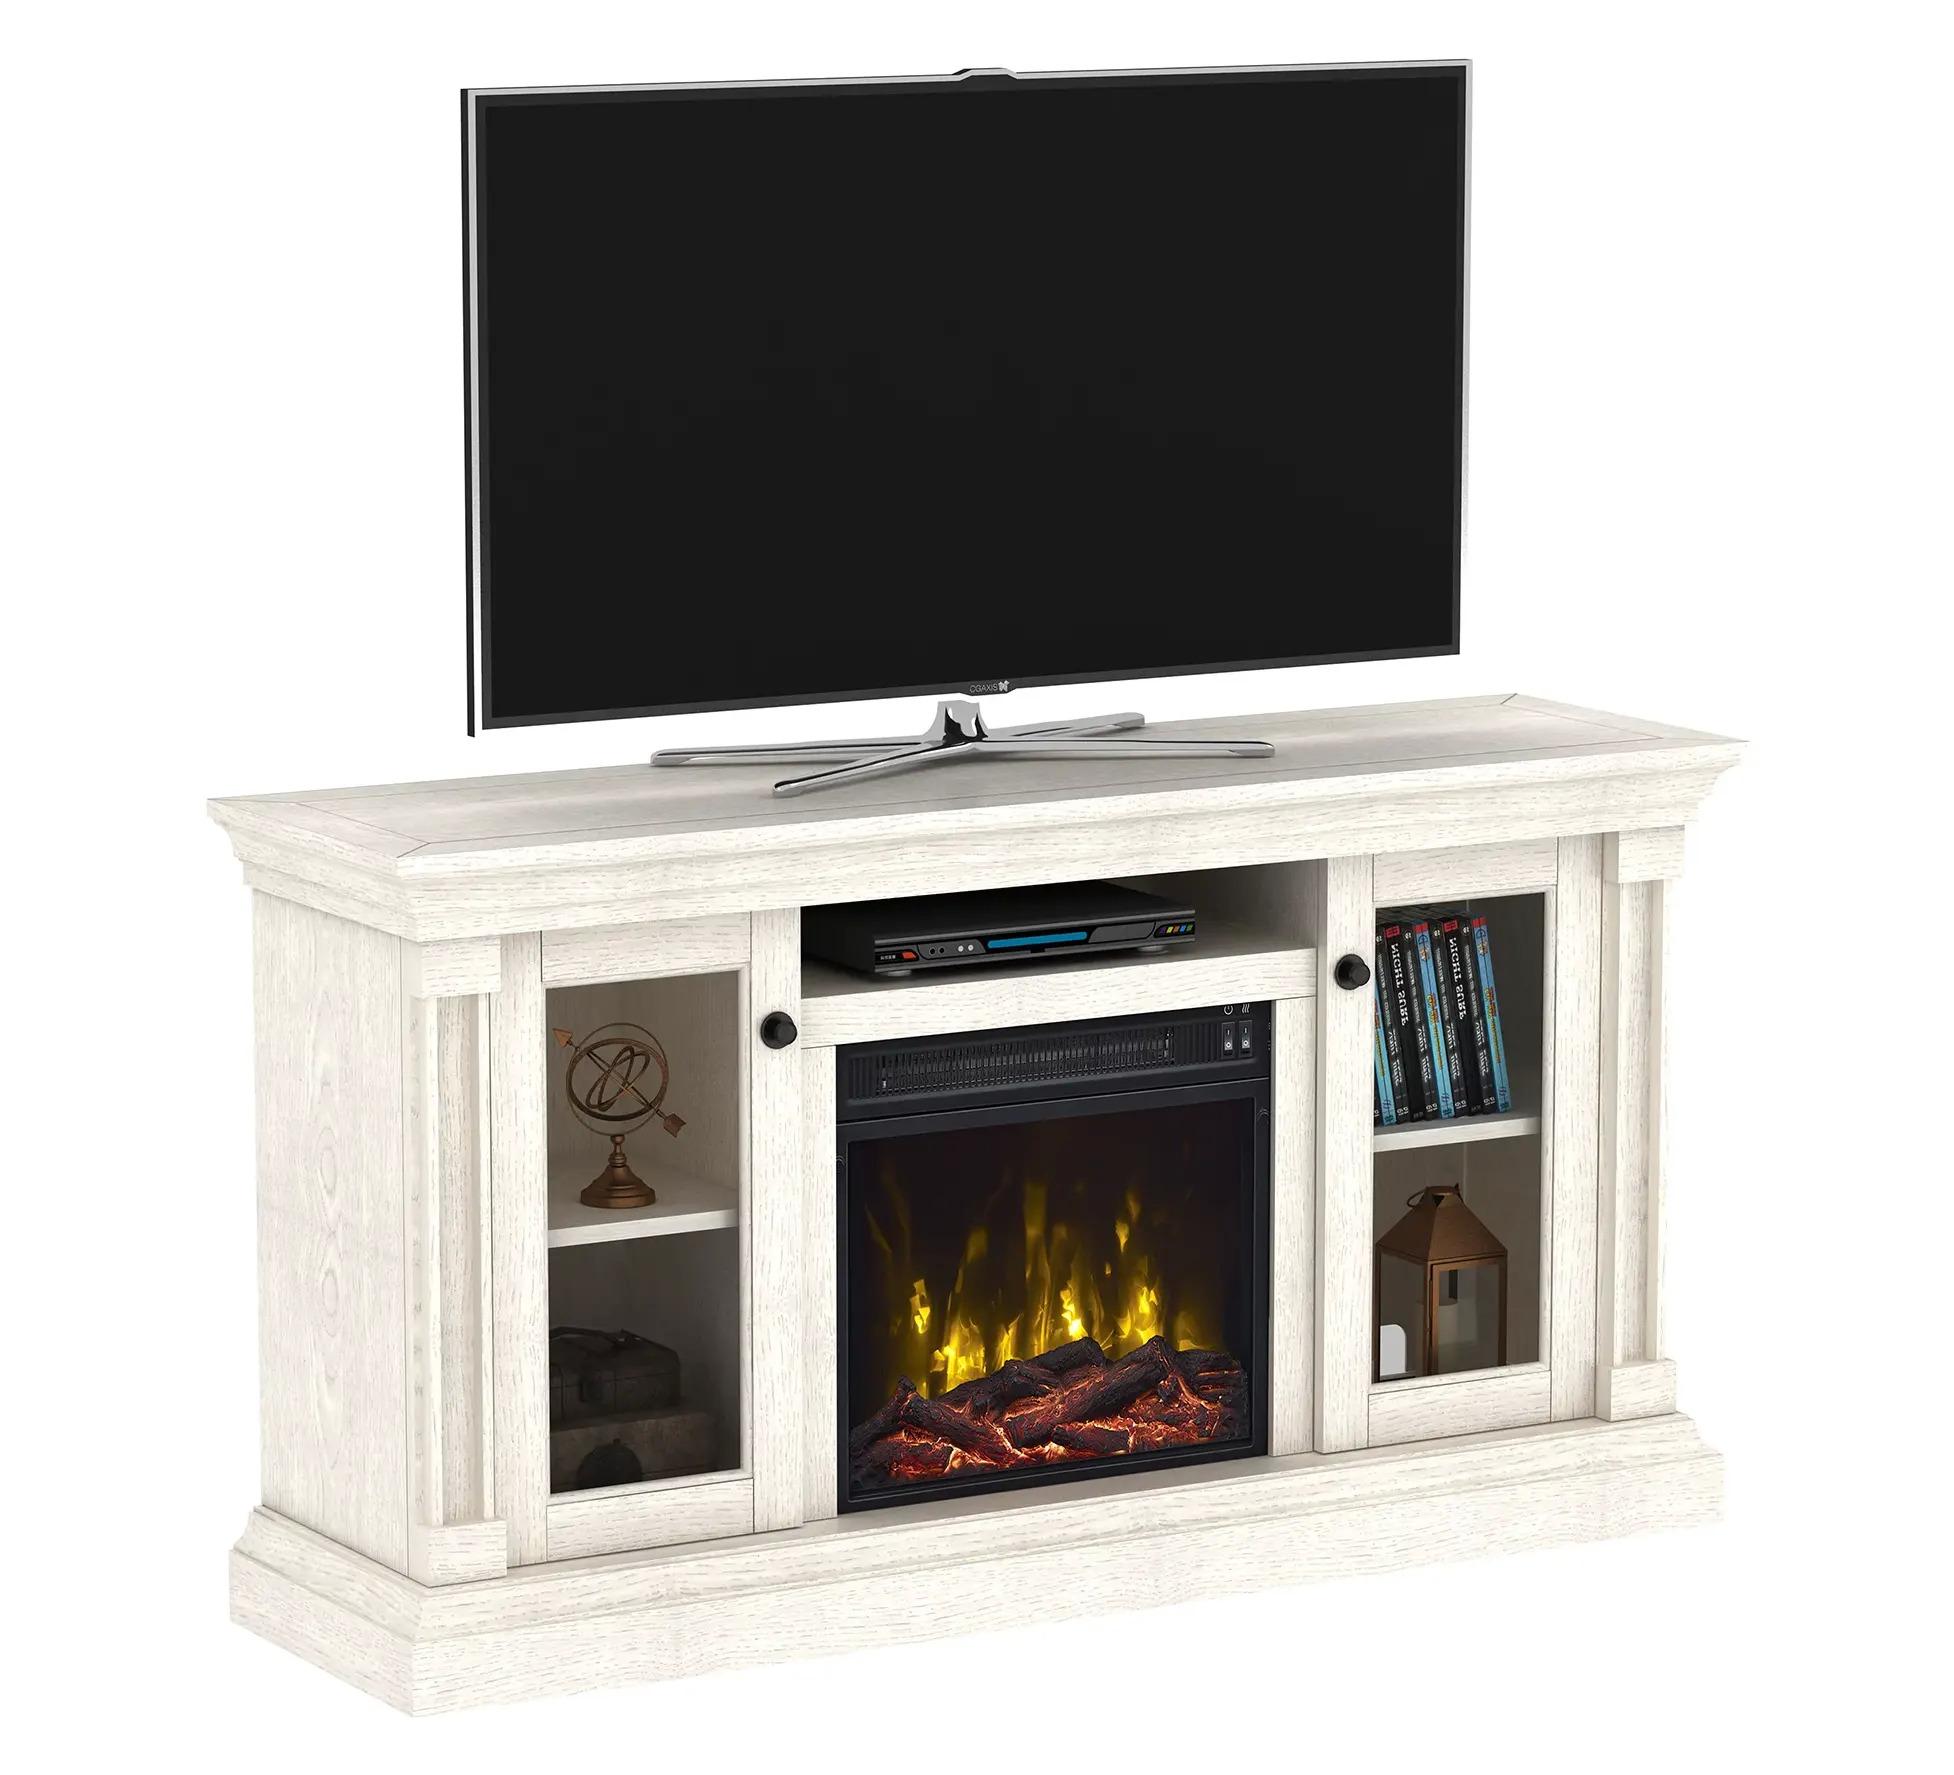 Twin Star Classic Flame Electric Fireplace TV Stand for $198.98 Shipped